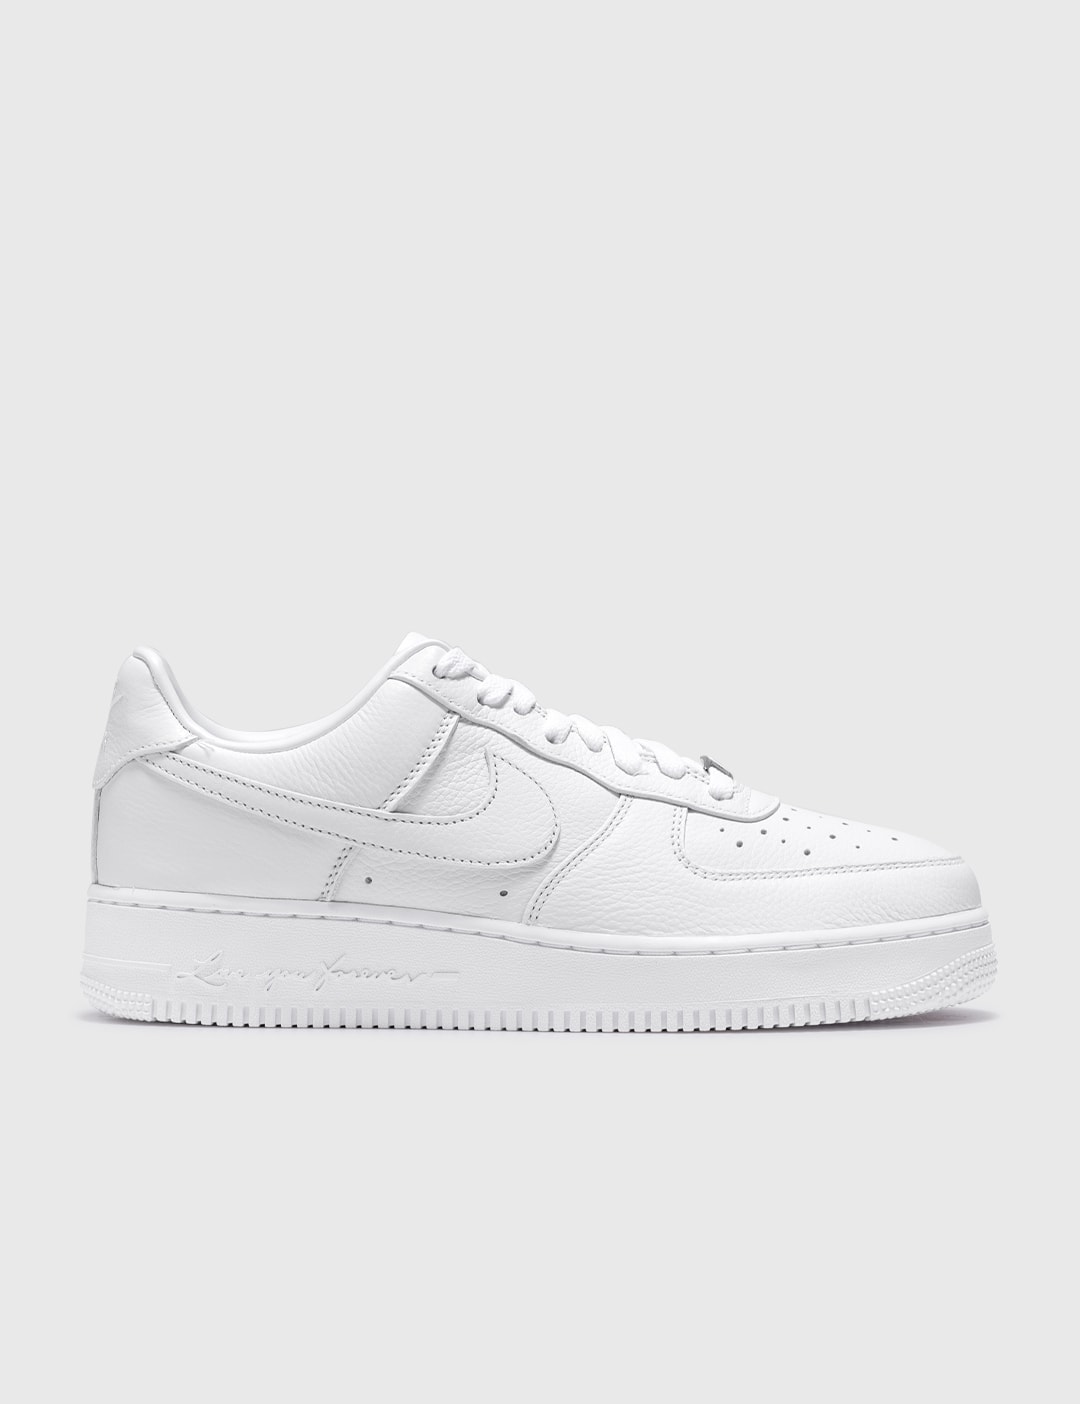 Beschrijven Carry Okkernoot Nike - Nocta Air Force 1 | HBX - Globally Curated Fashion and Lifestyle by  Hypebeast